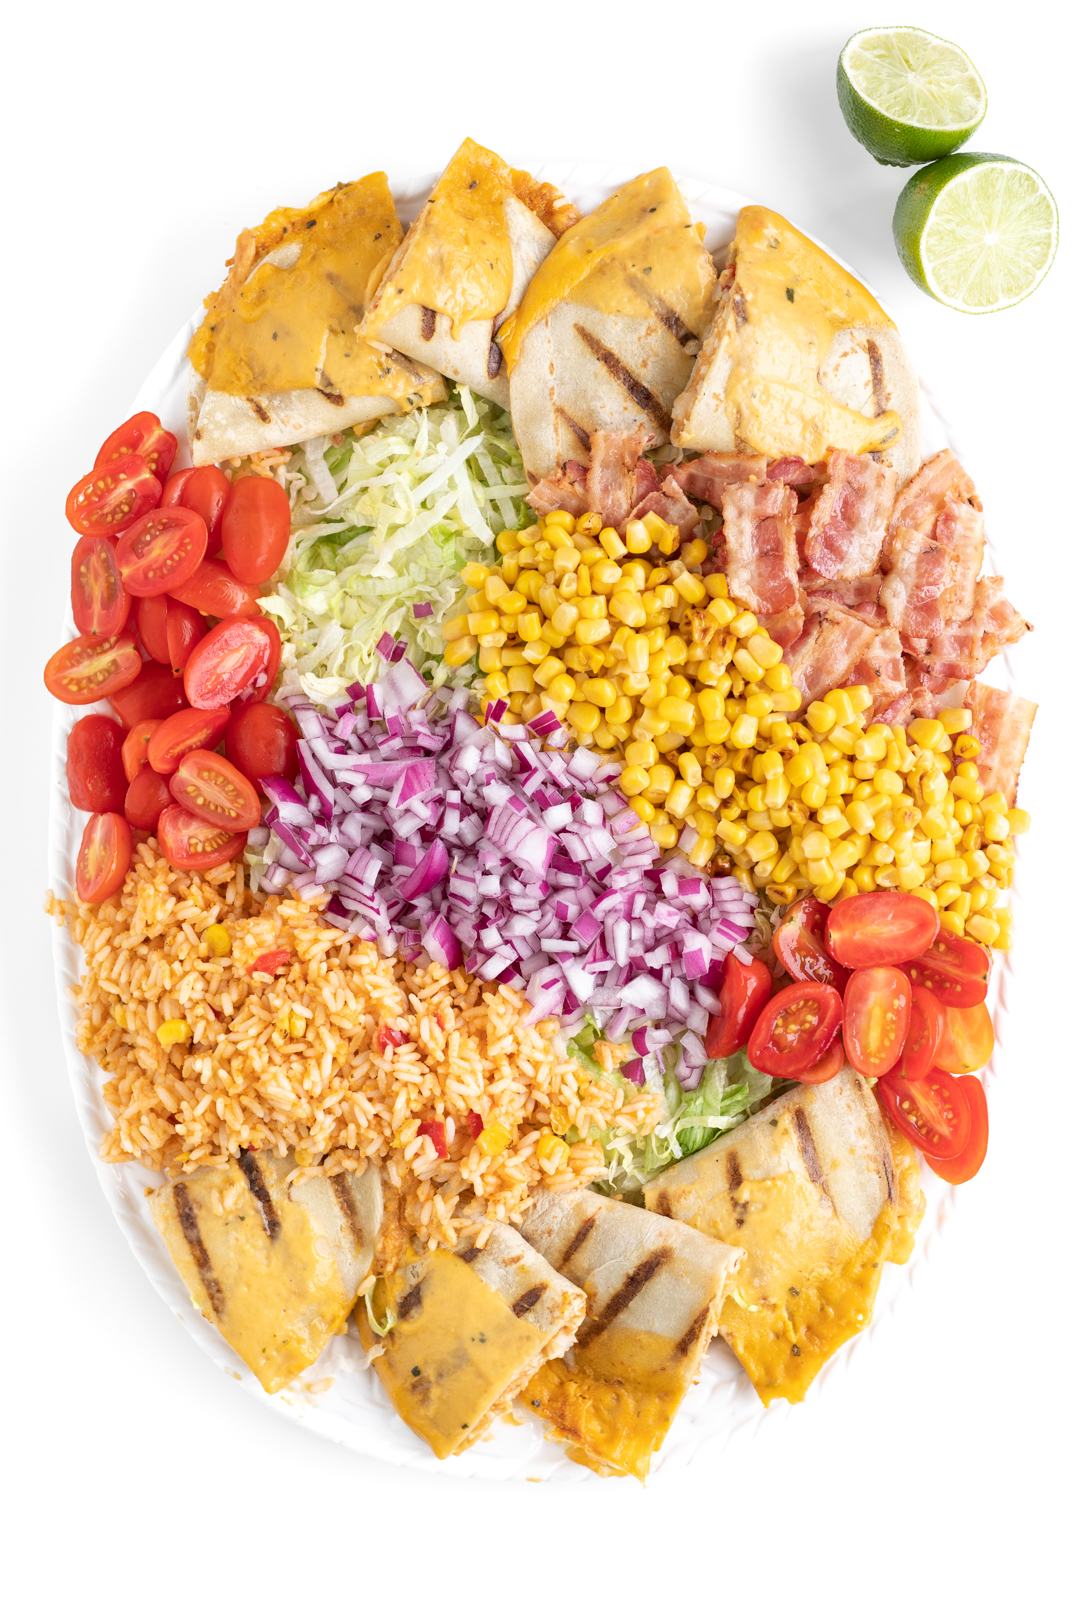 over top photo of a salad being made with shredded lettuce, grape tomatoes, mexican rice, bacon, quesadillas